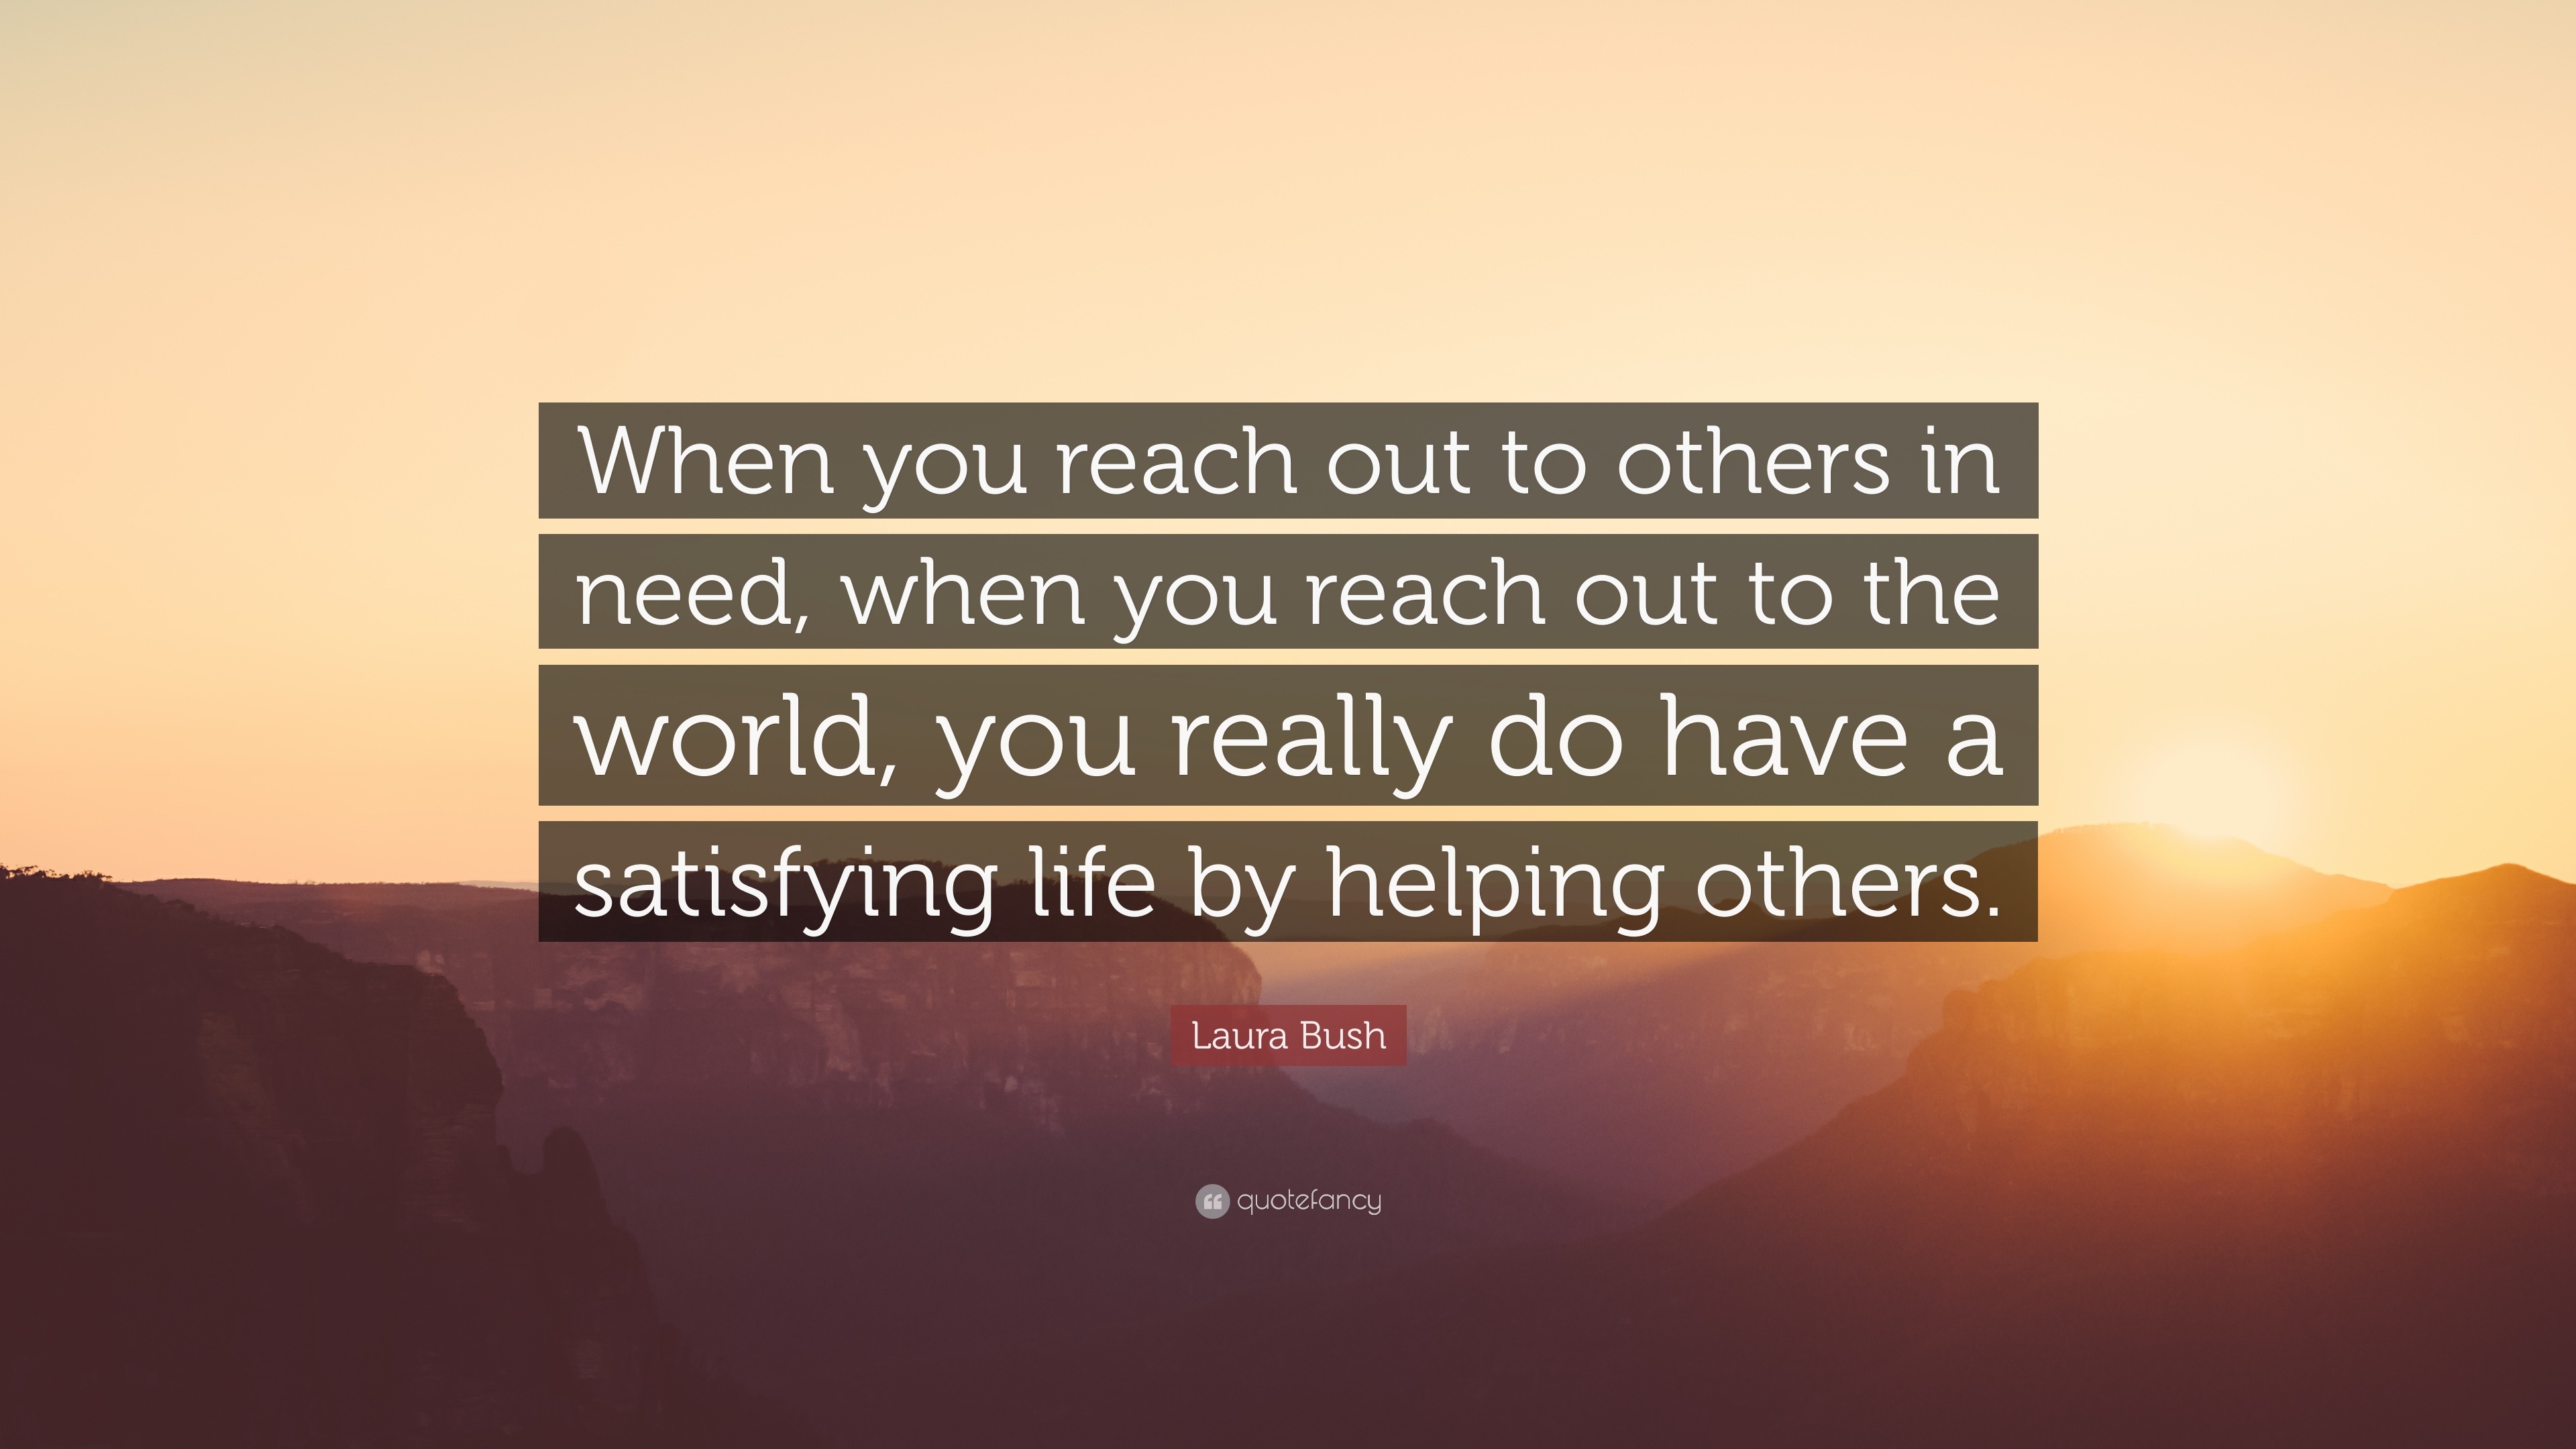 Laura Bush Quote When You Reach Out To Others In Need When You Reach Out To The World You Really Do Have A Satisfying Life By Helping O